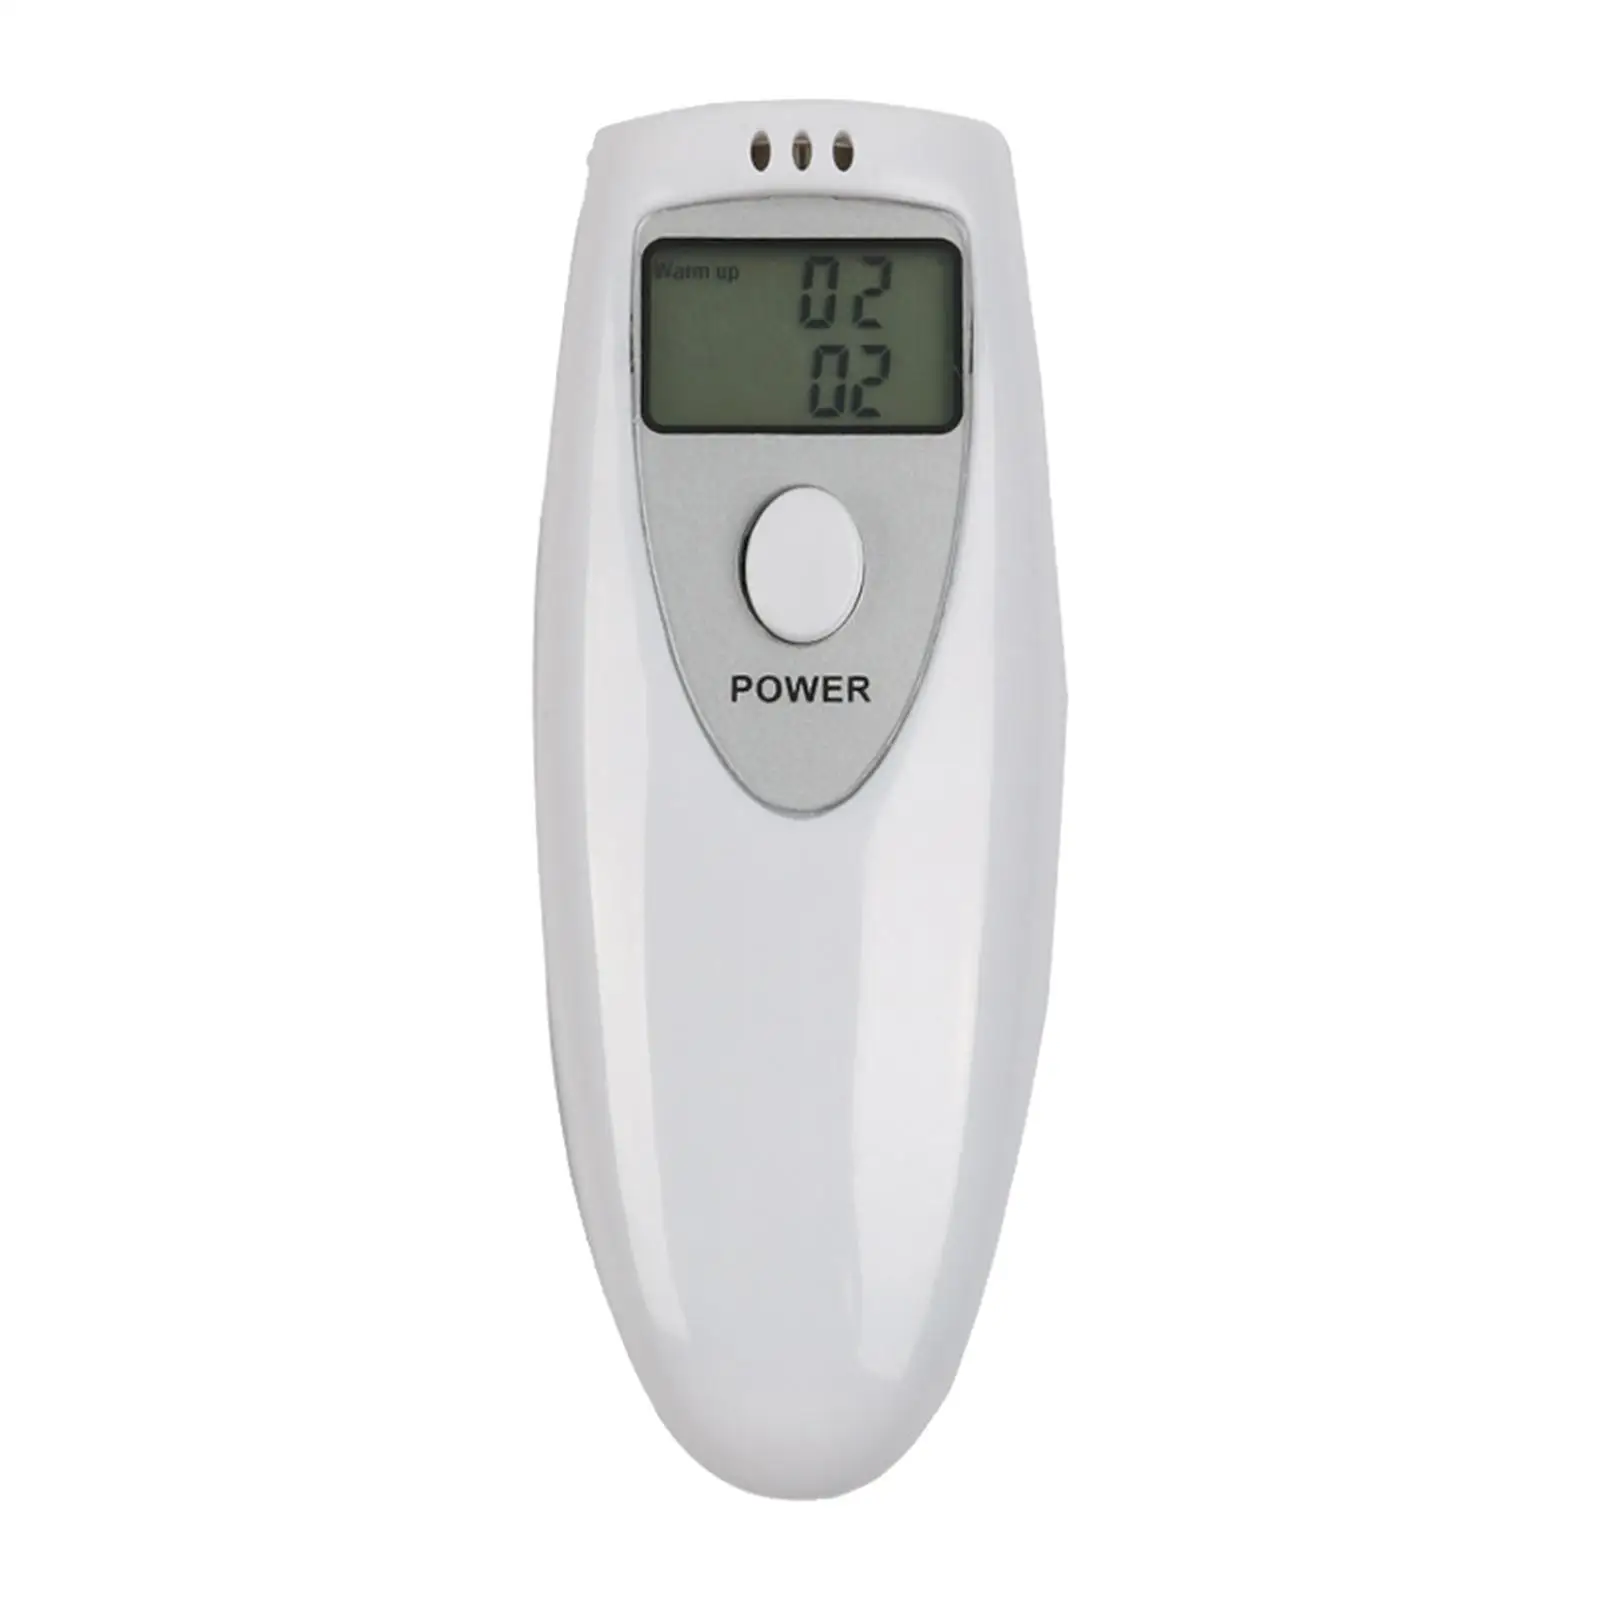 Portable Digital Alcohol Tester Small Size Easy to Carry Good Accuracy